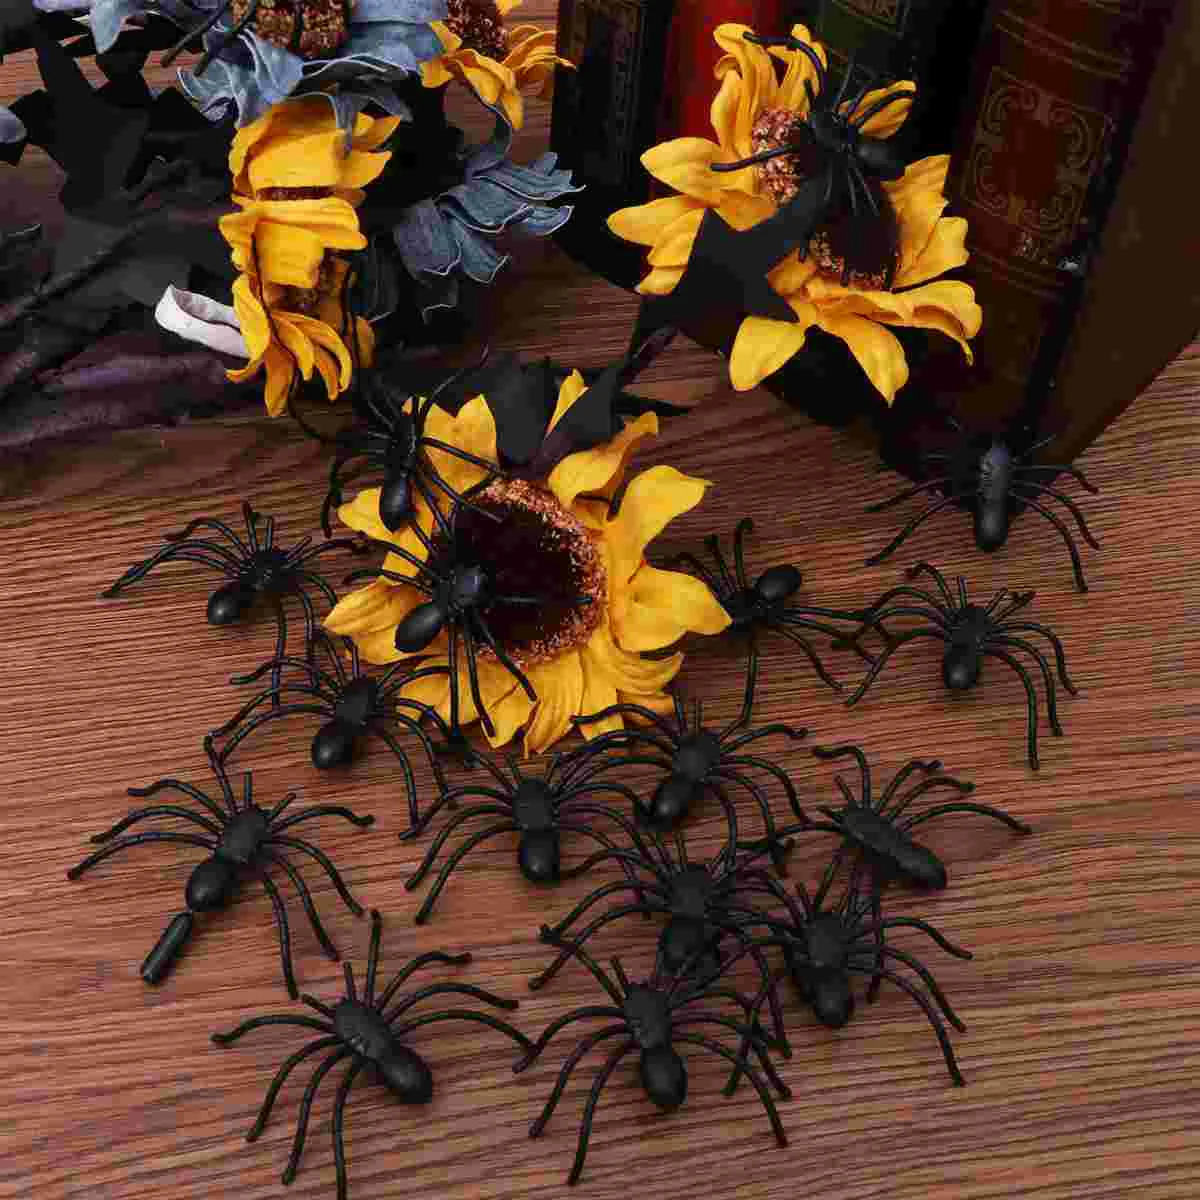 

100pcs Fake Spider Halloween Simulation Prank Joking Funny Horror Decor for Carnivals Costume Ball Party Props (Black)